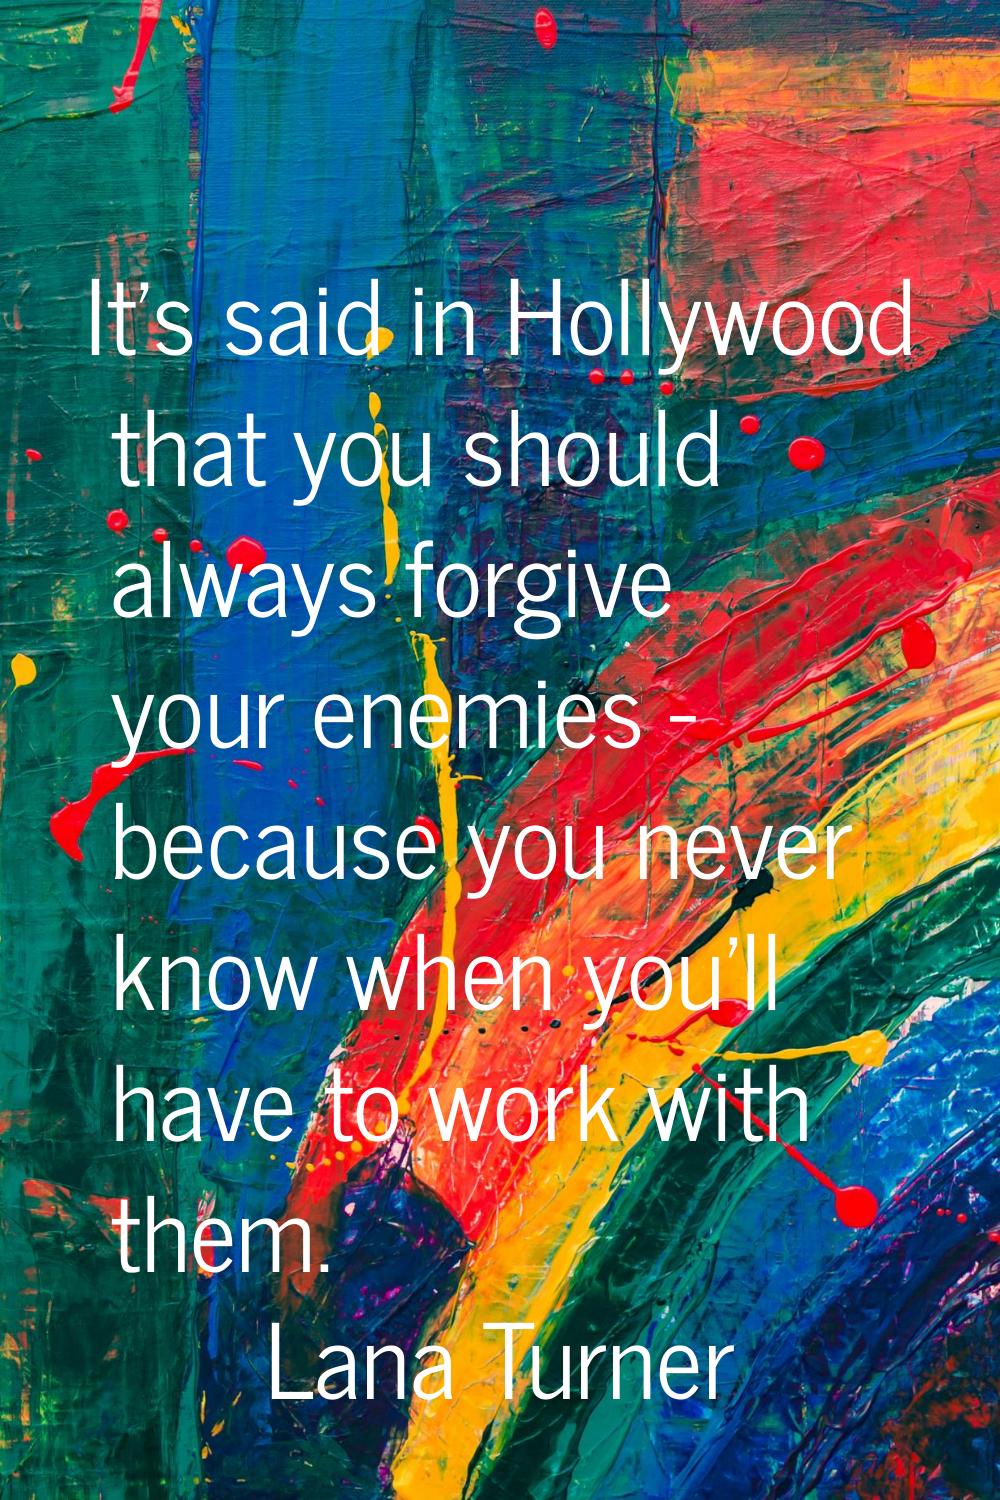 It's said in Hollywood that you should always forgive your enemies - because you never know when yo